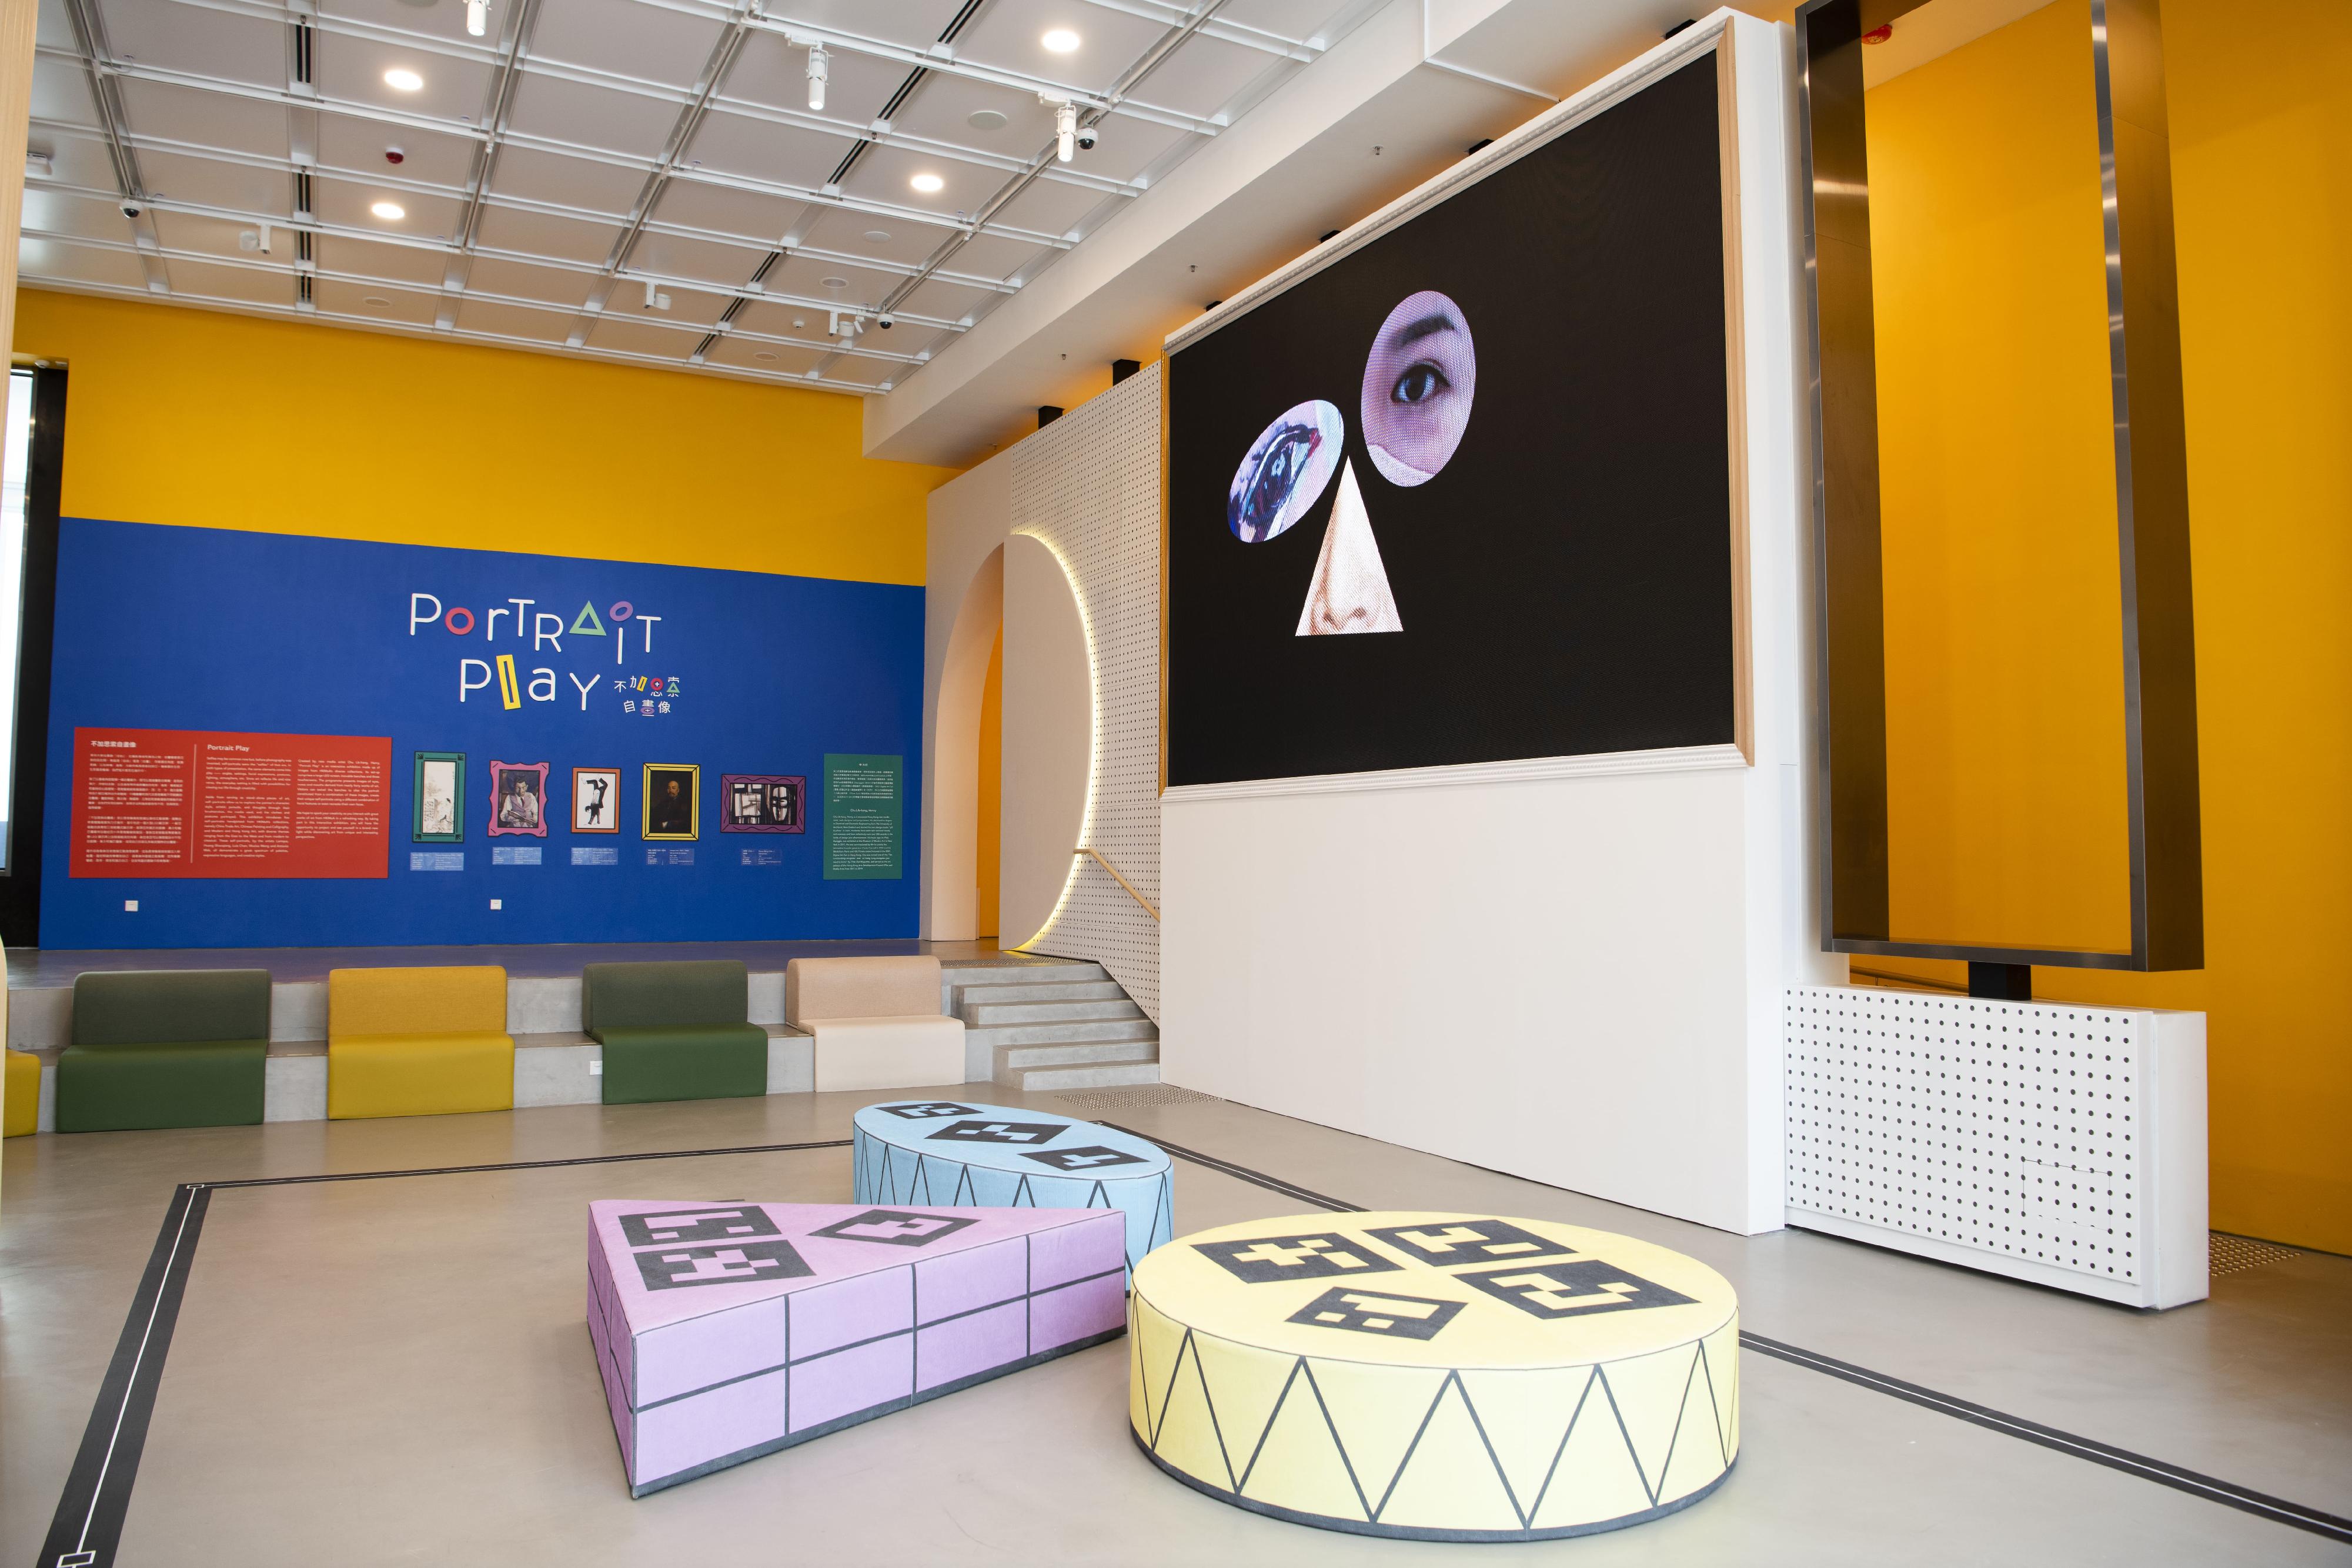 The Hong Kong Museum of Art's commissioned interactive exhibition "Portrait Play" won the Bronze Award in the DFA Design for Asia Awards 2023, and the Silver Award in the Hong Kong ICT Awards 2023: Digital Entertainment (Interactive Design) Award.